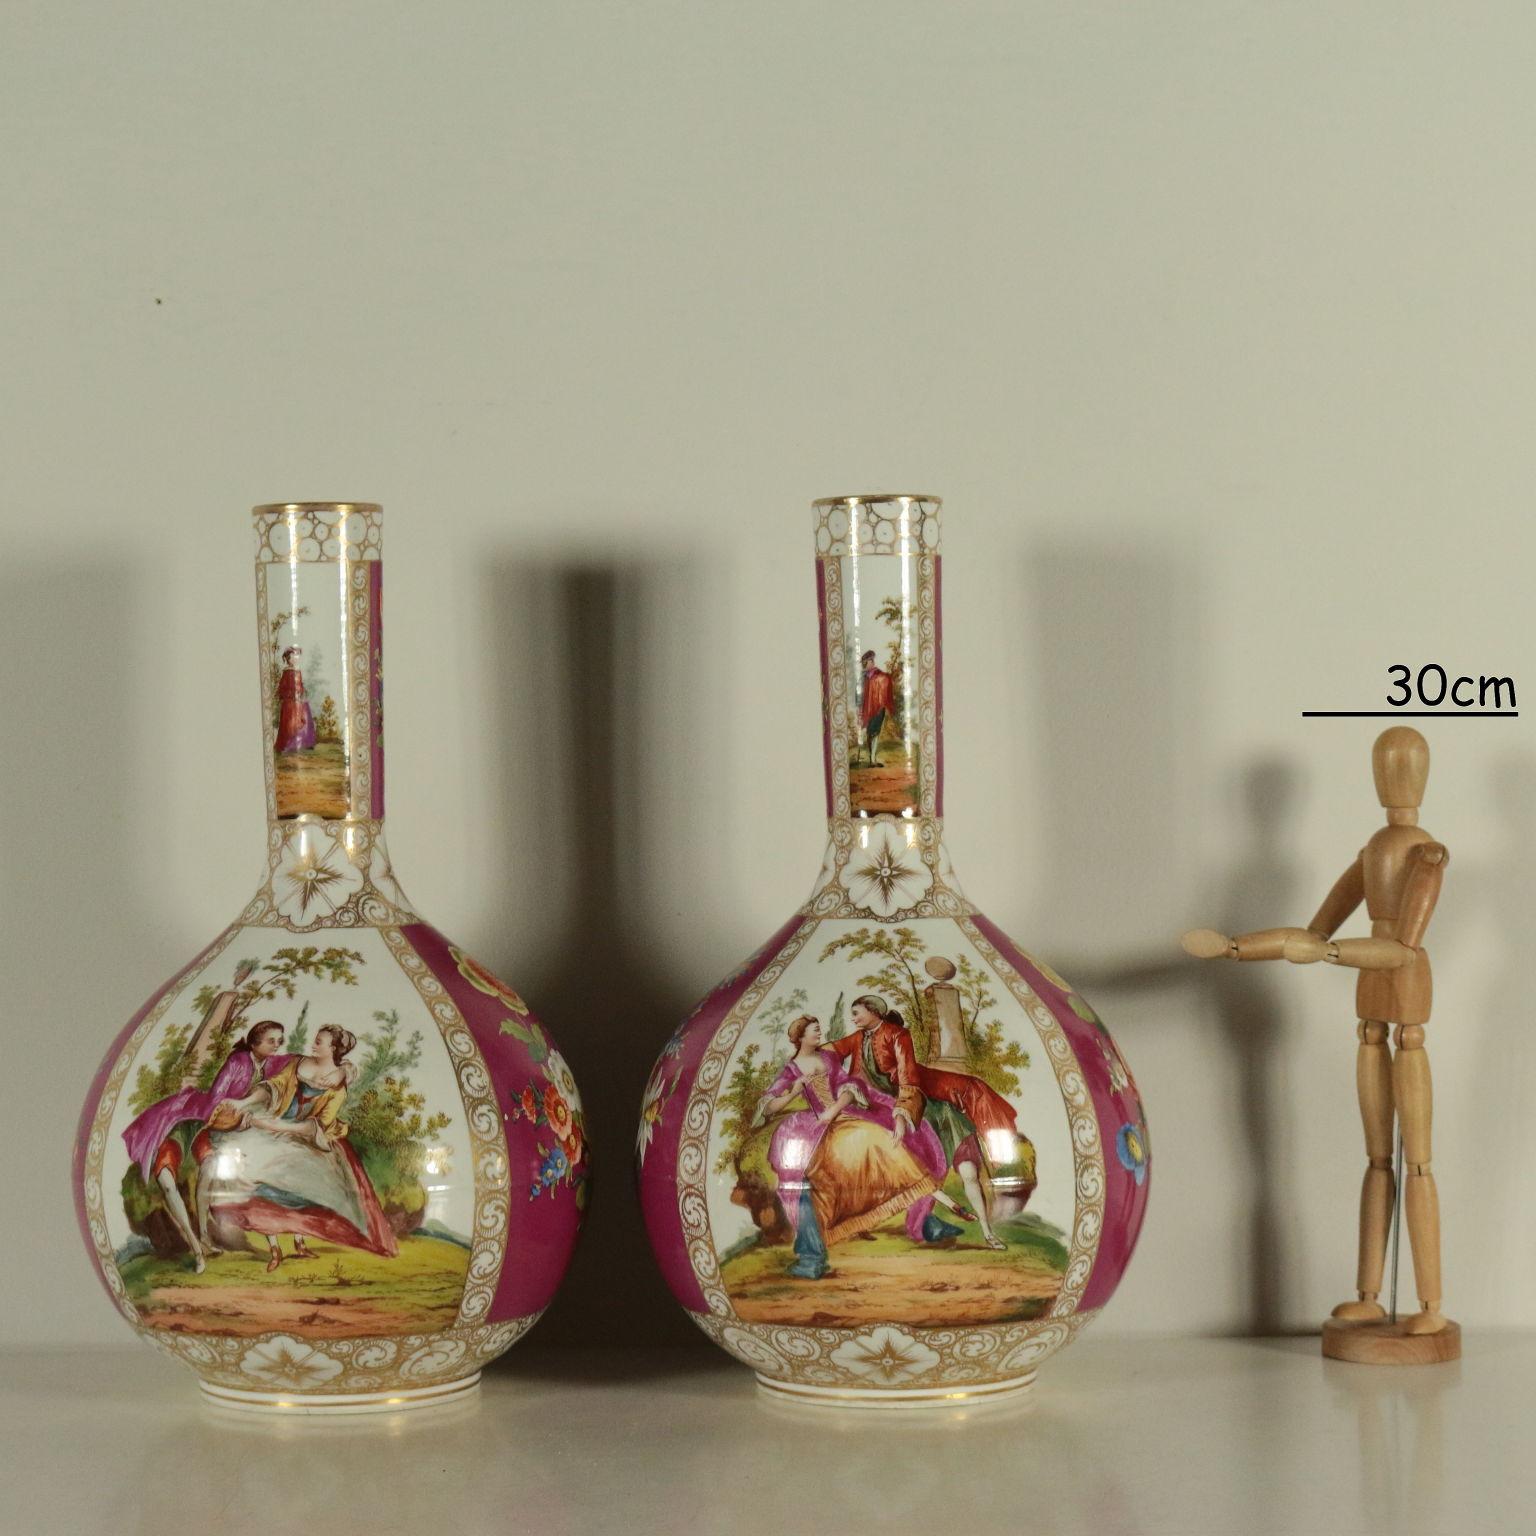 Pei of porcelain vases with long neck and gilded decorations that create reserves. Painted with bouquets, figures and lovely scenes with a landscape in the background. Manufacture's brand under the base.